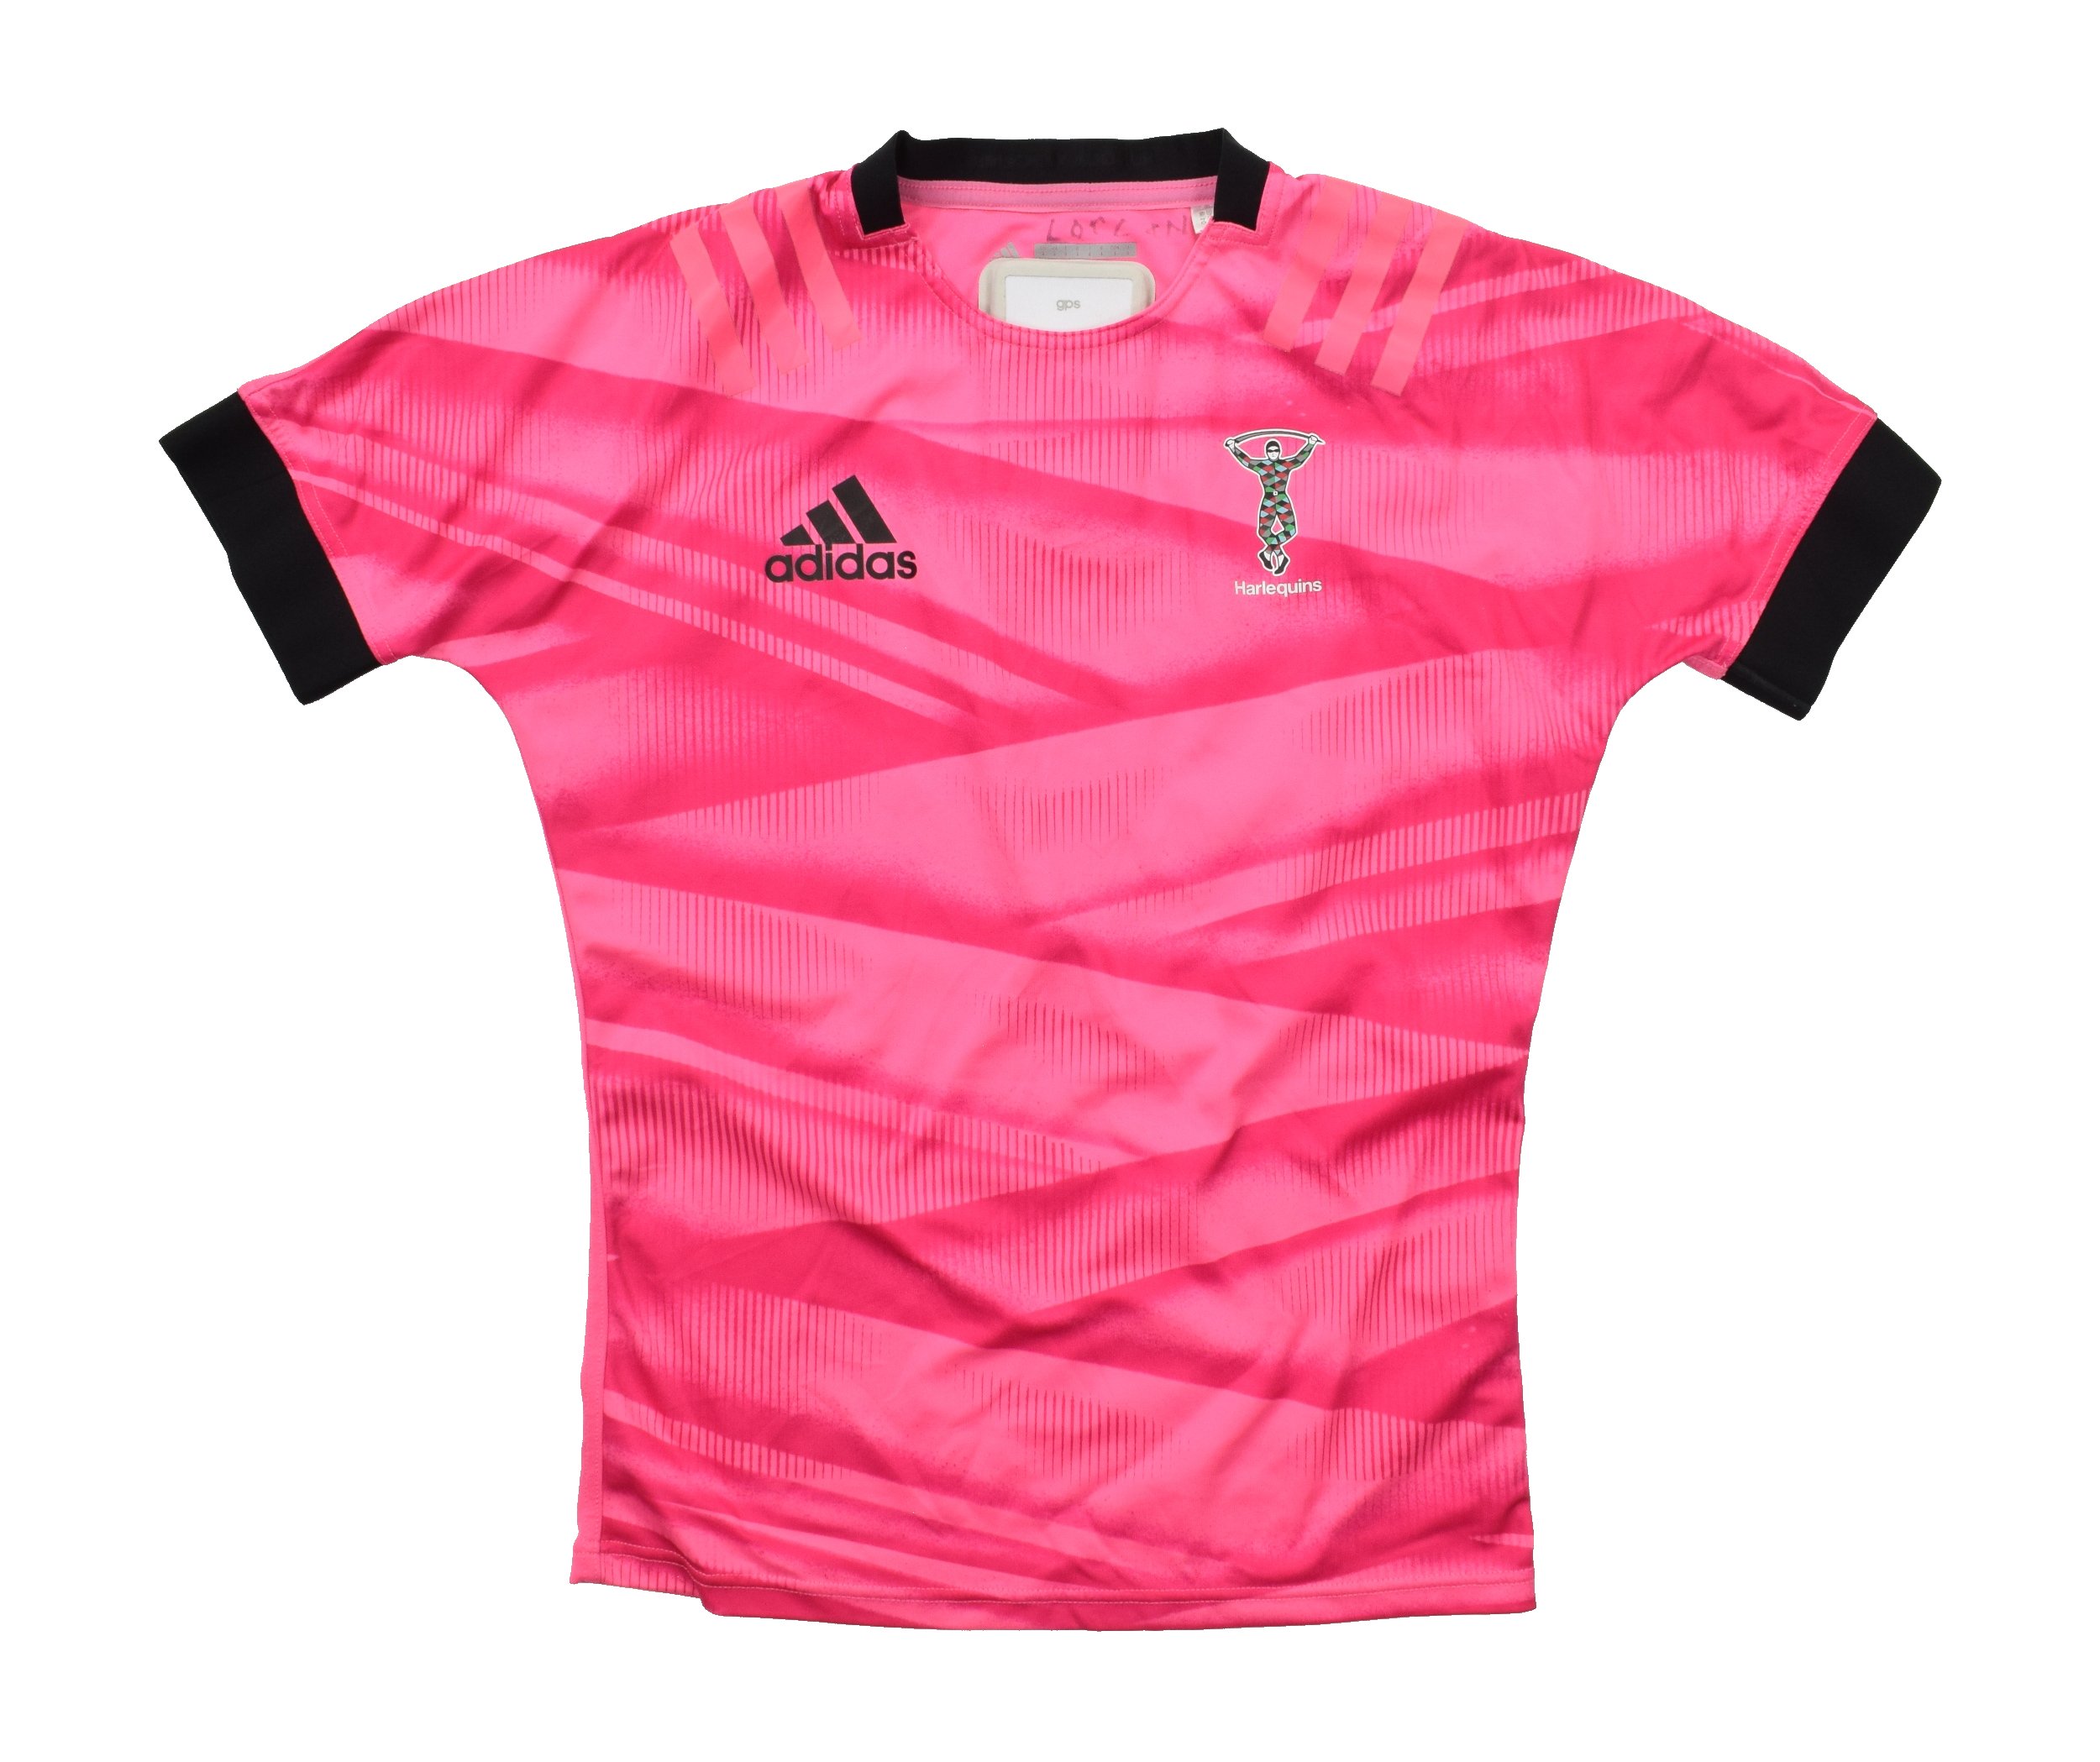 HARLEQUINS RUGBY SHIRT M Rugby \ Rugby Union \ Harlequins | Classic ...